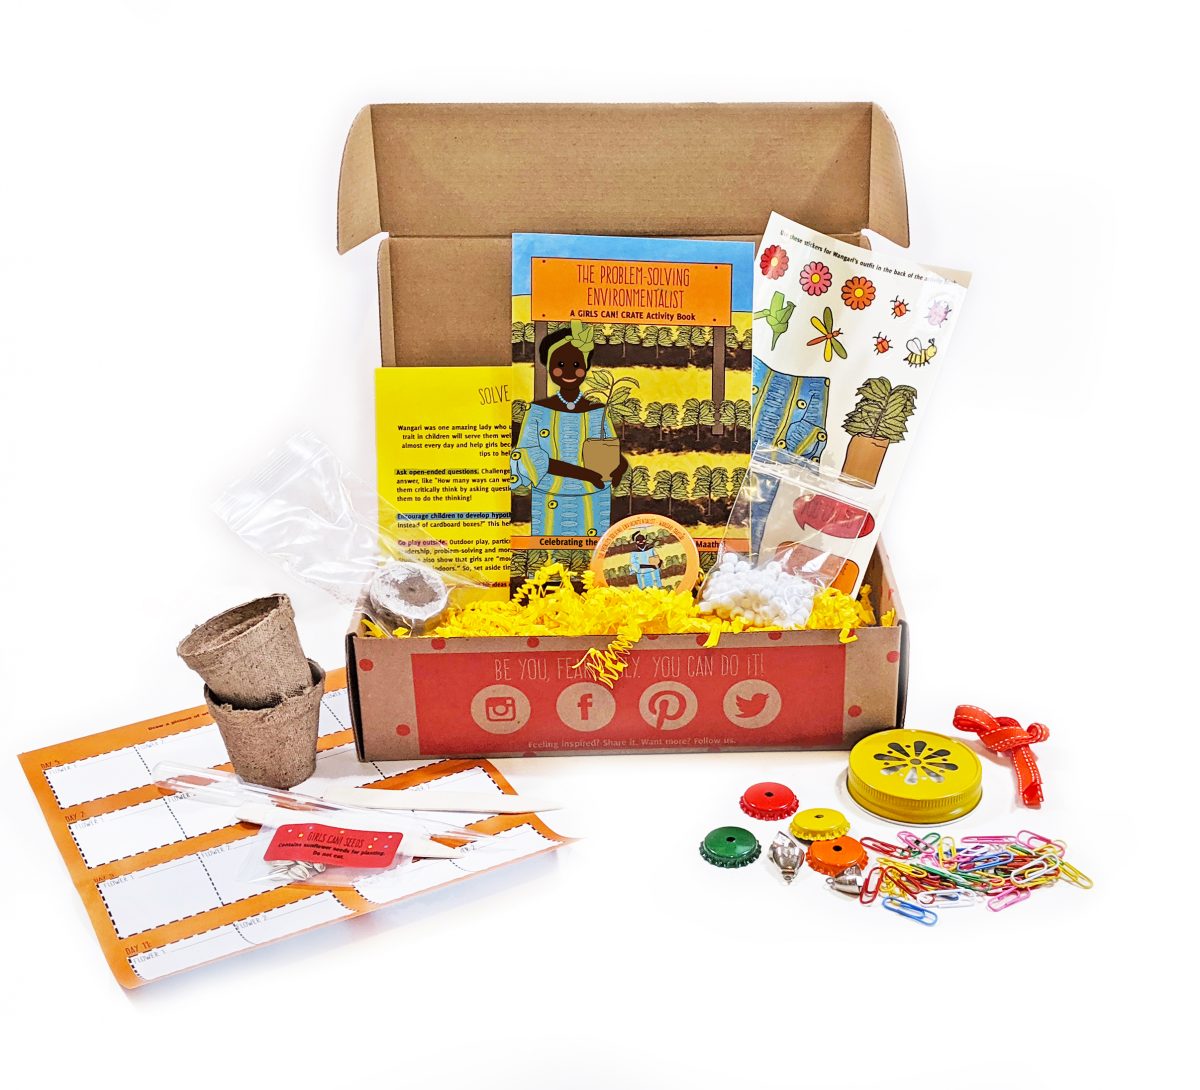 Awesome Toy Subscription Boxes For Homeschooling During Covid-19